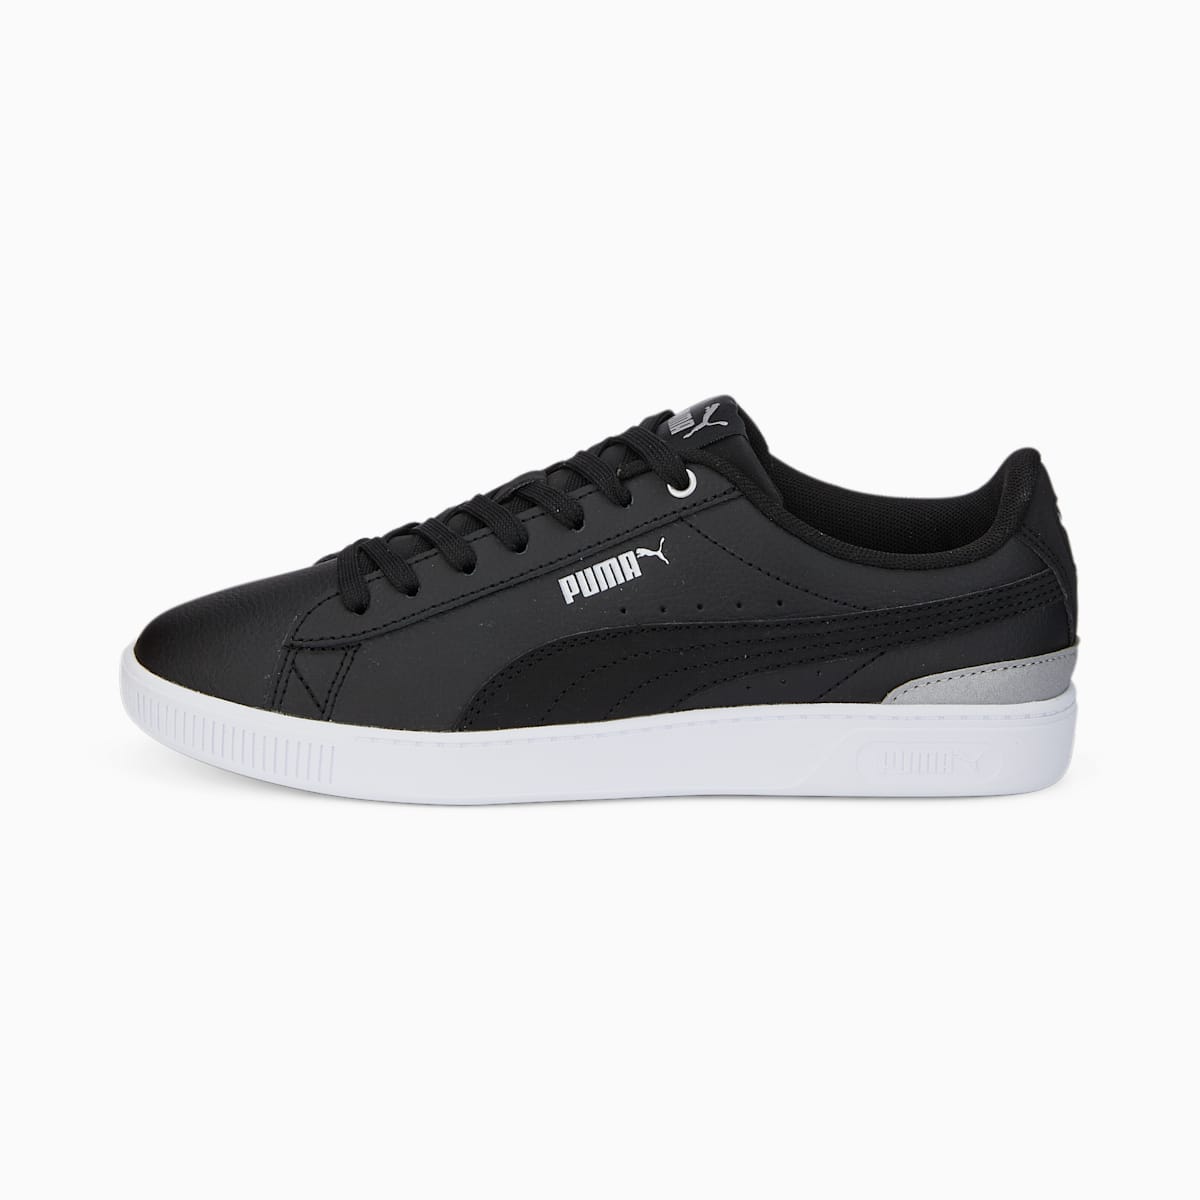 Vikky v3 Leather Women's Trainers